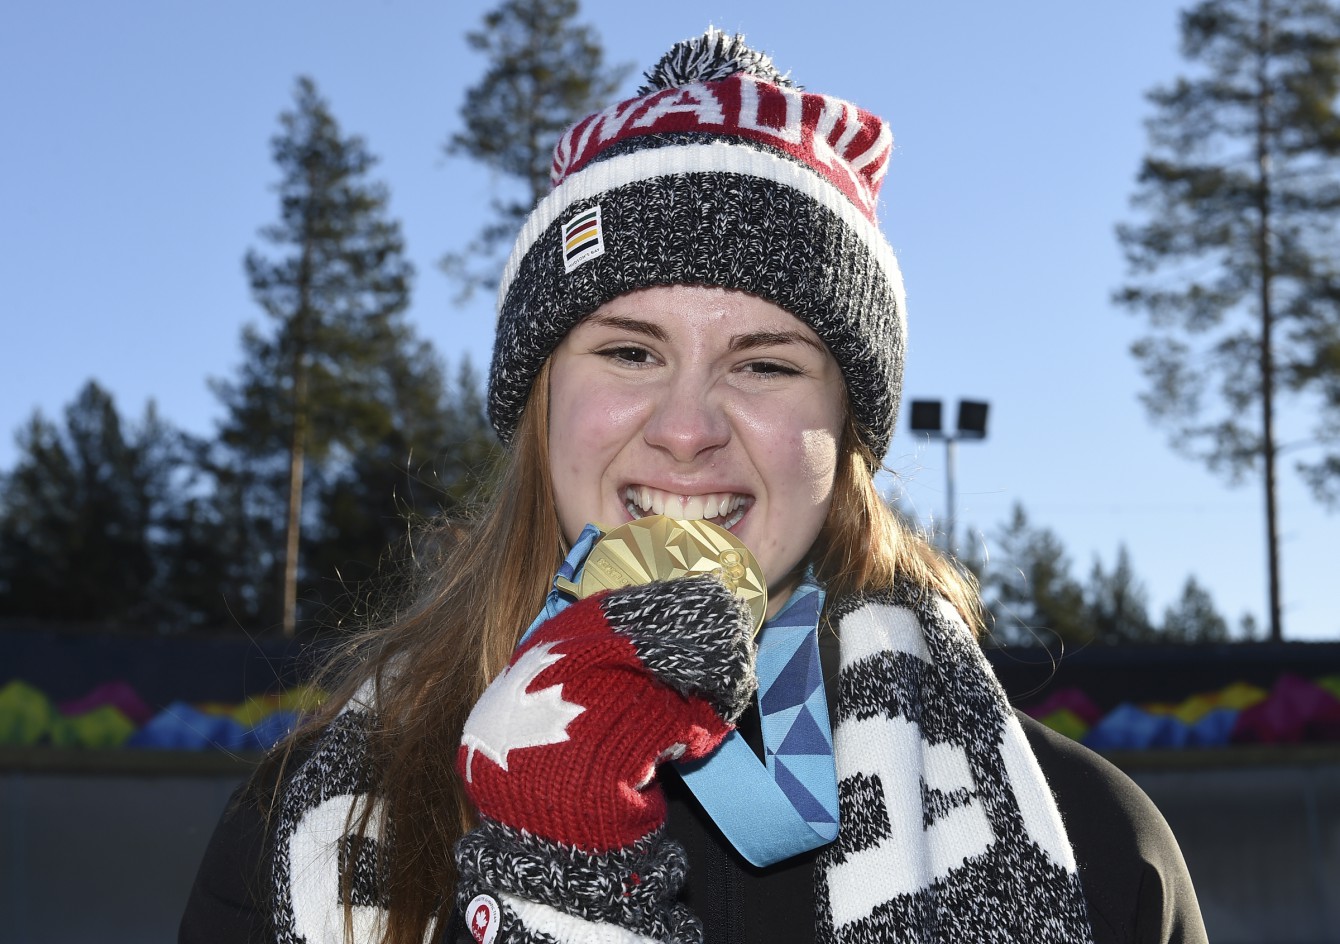 Brooke Apshkrum CAN poses for a photo after winning the Luge Women's Singles competition at Lillehammer Olympic Sliding Centre during the Winter Youth Olympic Games, Lillehammer, Norway, 15 February 2016. Photo: Jon Buckle for YIS/IOC Handout image supplied by YIS/IOC